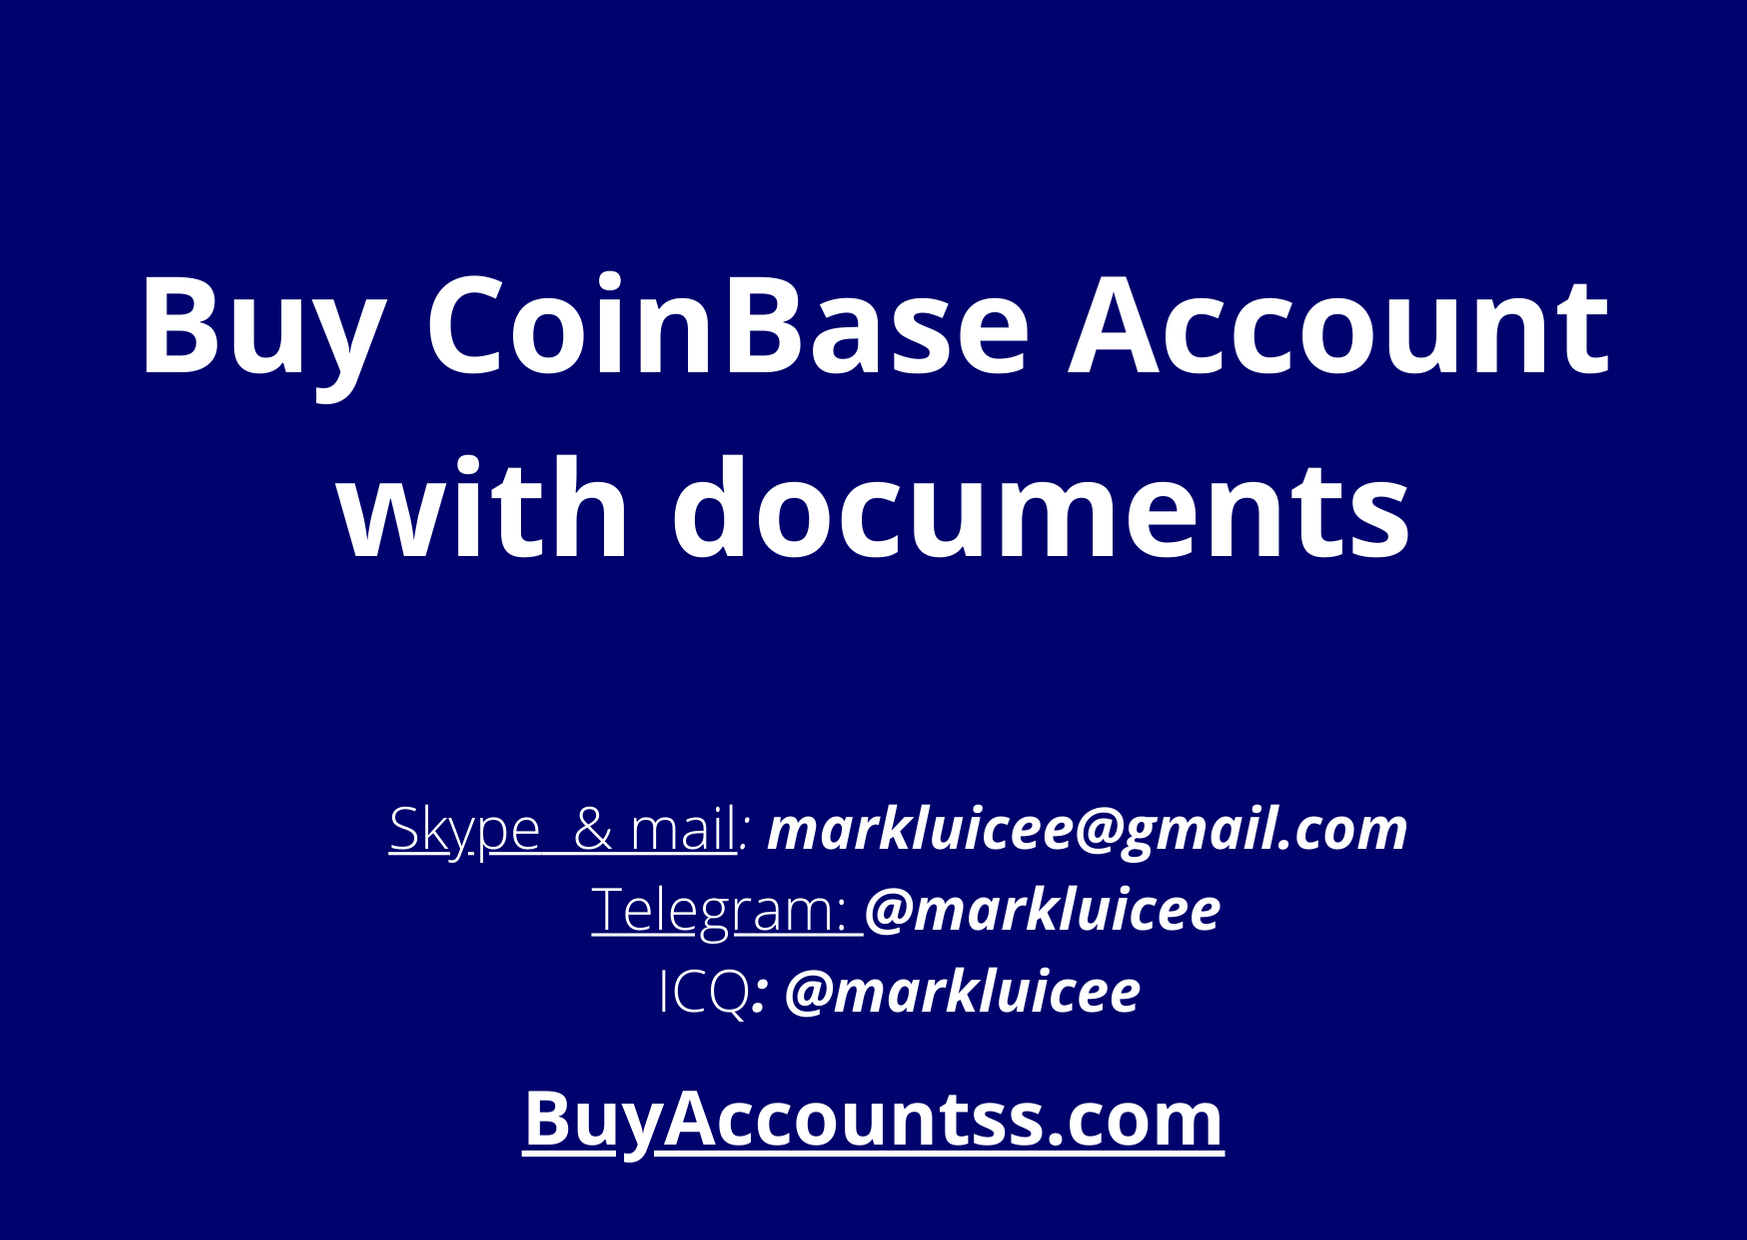 Buy CoinBase Verified Account With documents - BuyAccountss